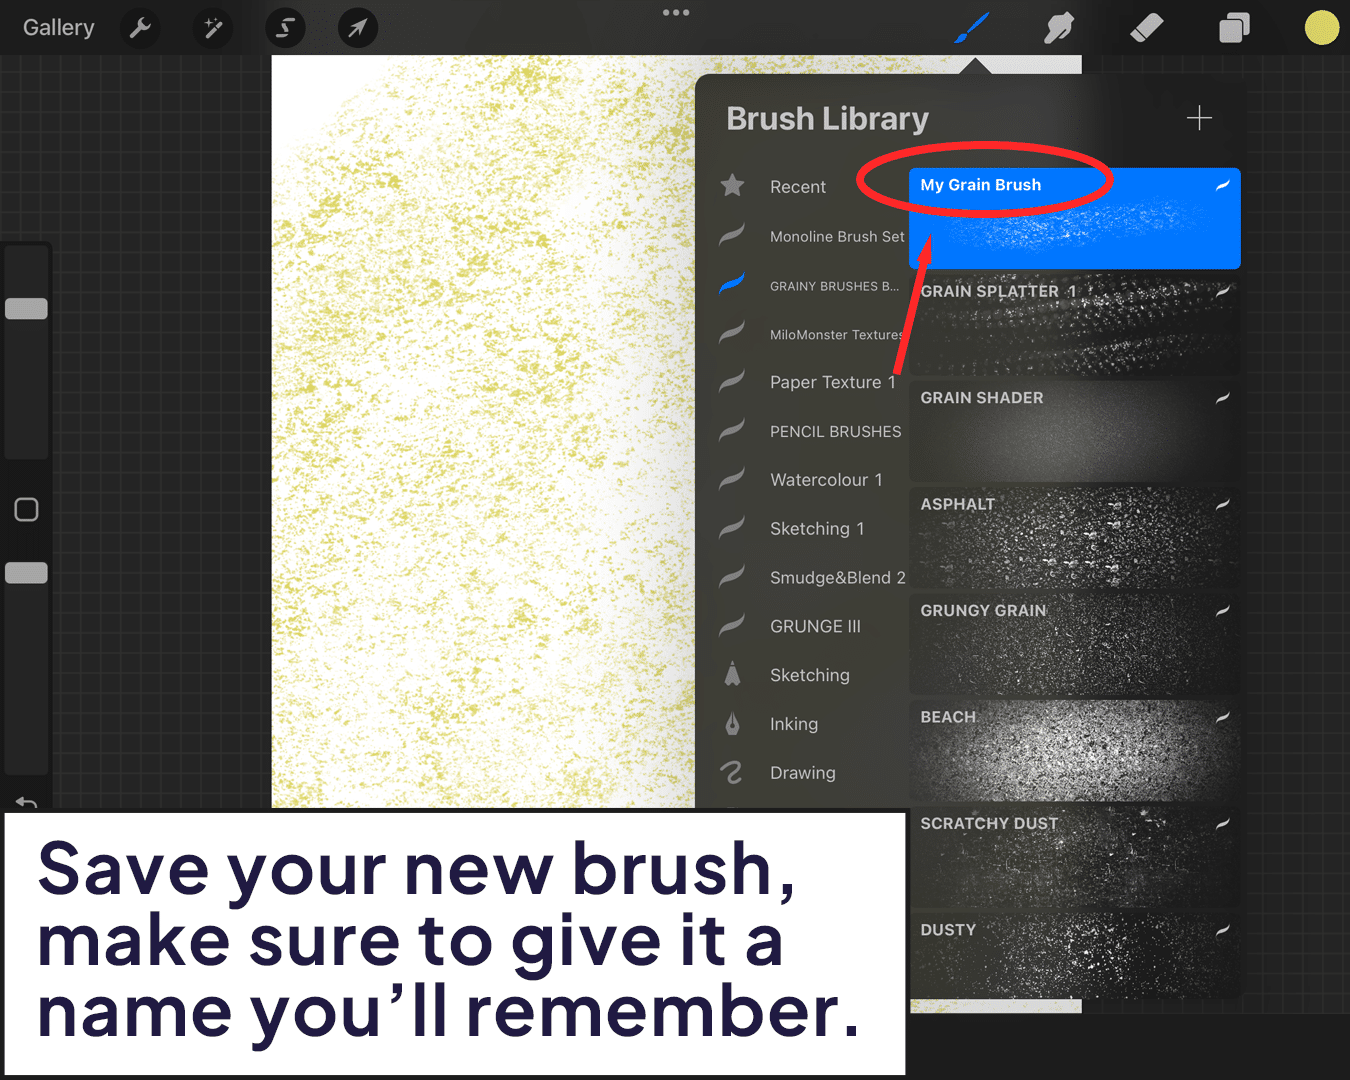 Name your brush